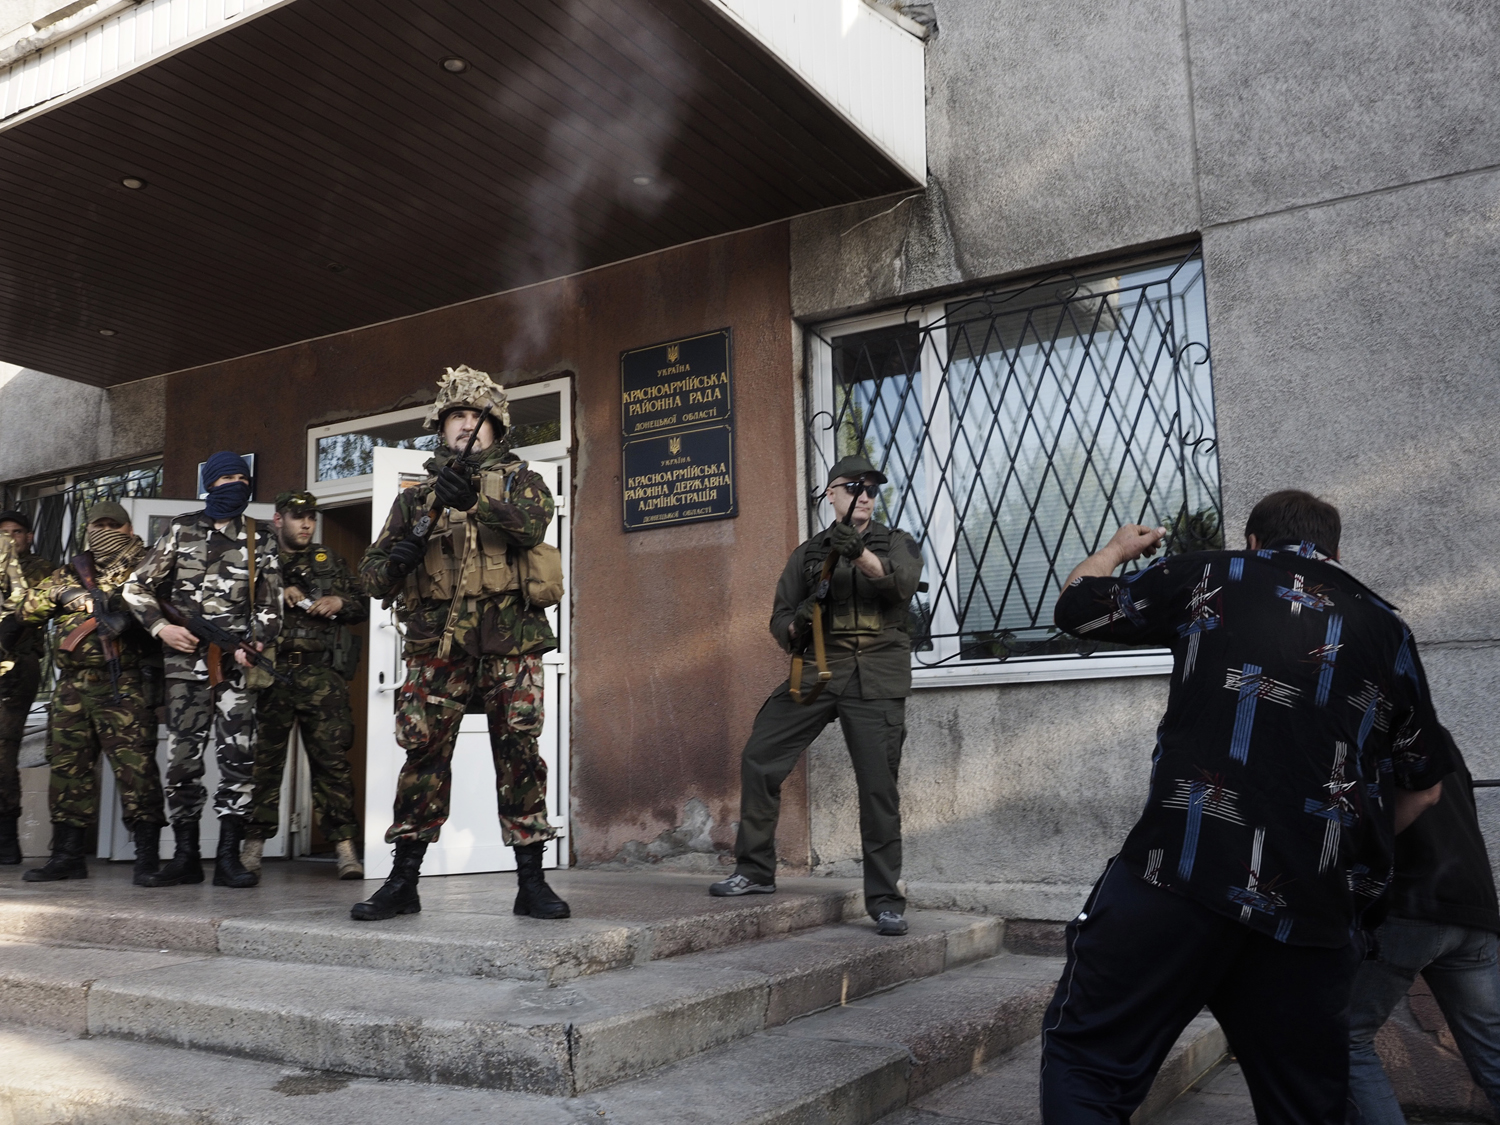 May 11, 2014. An armed guard shoots into the air while preventing civilians from voting in an illegal referendum outside a polling location in Krasnoarmeisk, eastern Ukraine.